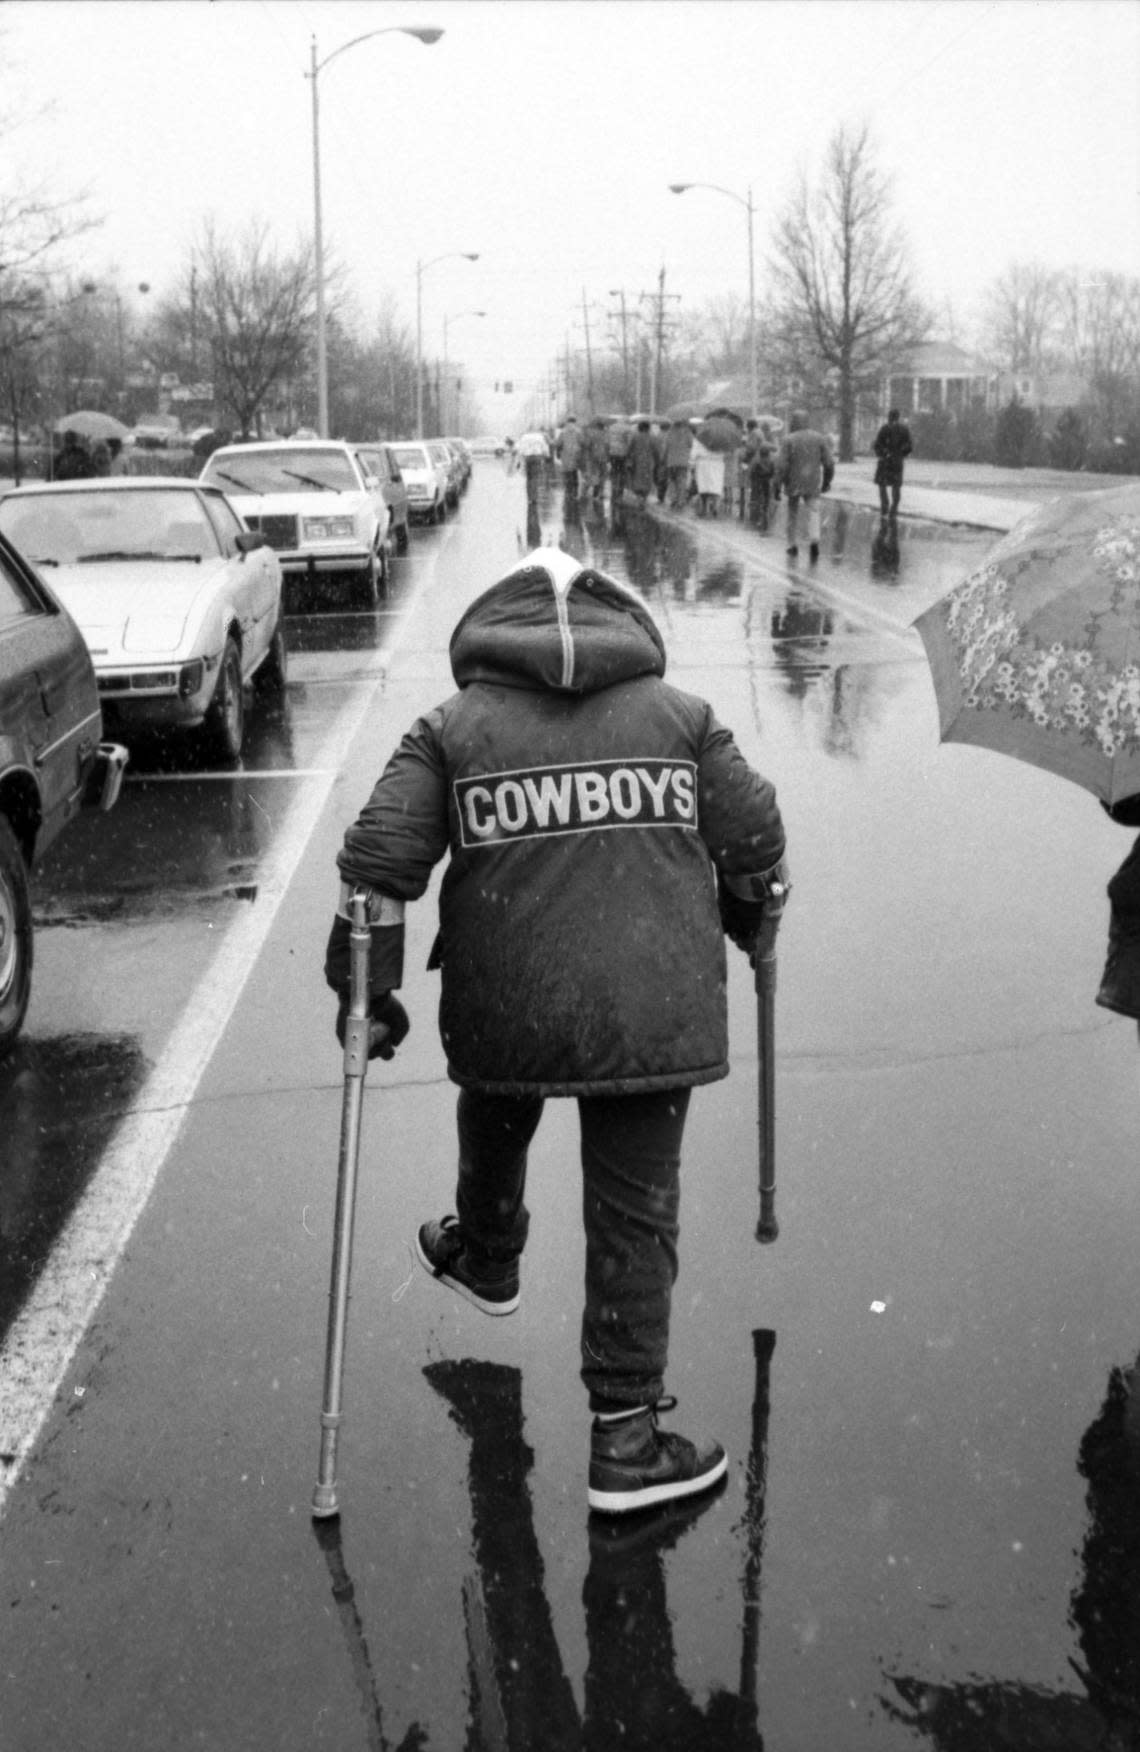 Eight-year-old Lamin Swann joined 1,200 people marching Jan. 19, 1986 in Lexington, Ky. on the eve the first national observance of Martin Luther King Jr. The 1 1/2-mile march went around the University of Kentucky campus, starting and ending at Memorial Coliseum. Swann also marched in 1987.